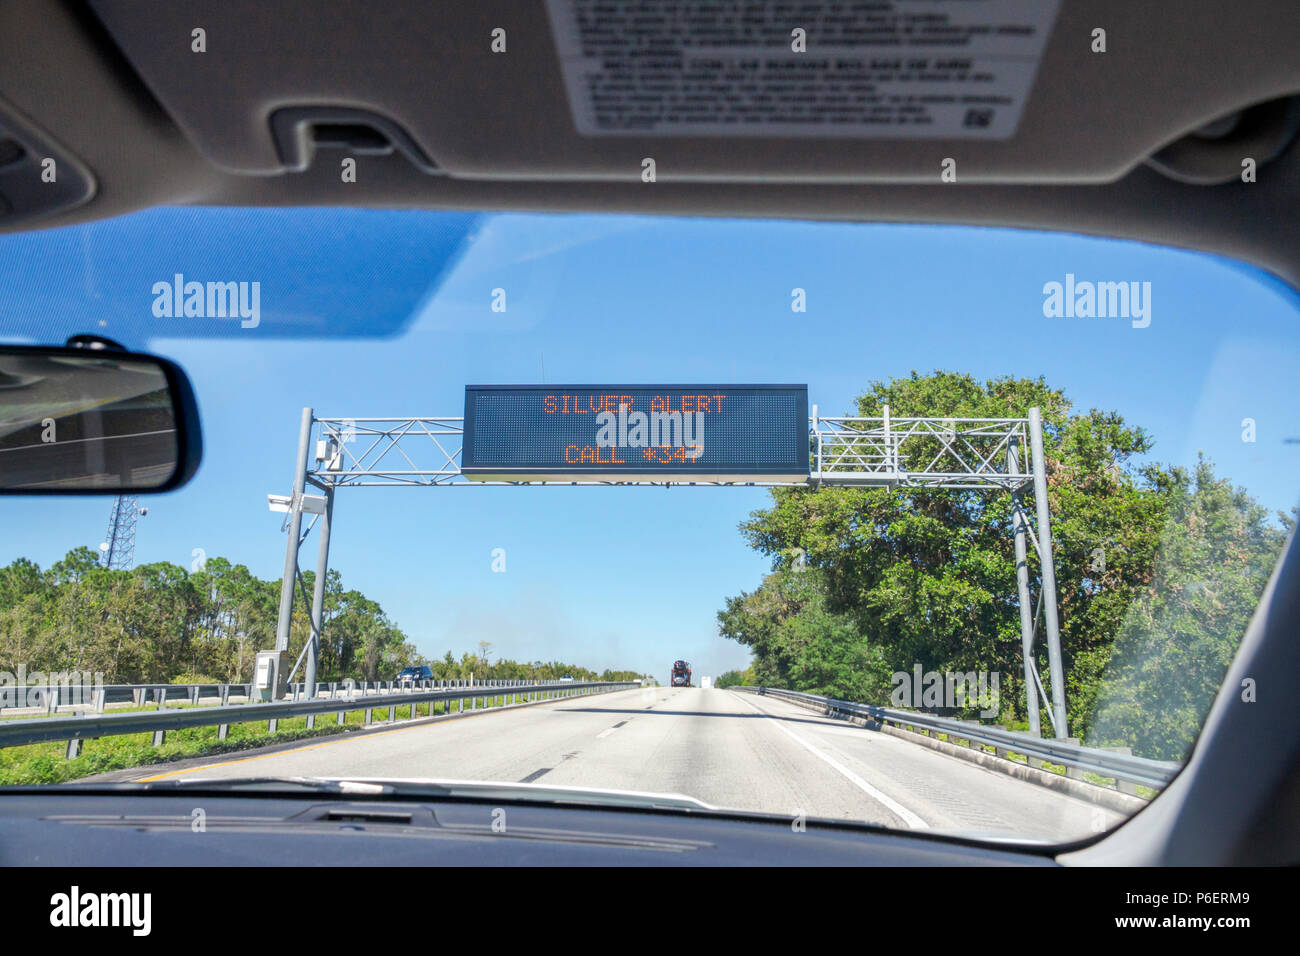 Florida,Fort Ft. Pierce,Florida Turnpike toll road,electronic sign message board,silver alert,missing senior citizen driver,FL171028013 Stock Photo